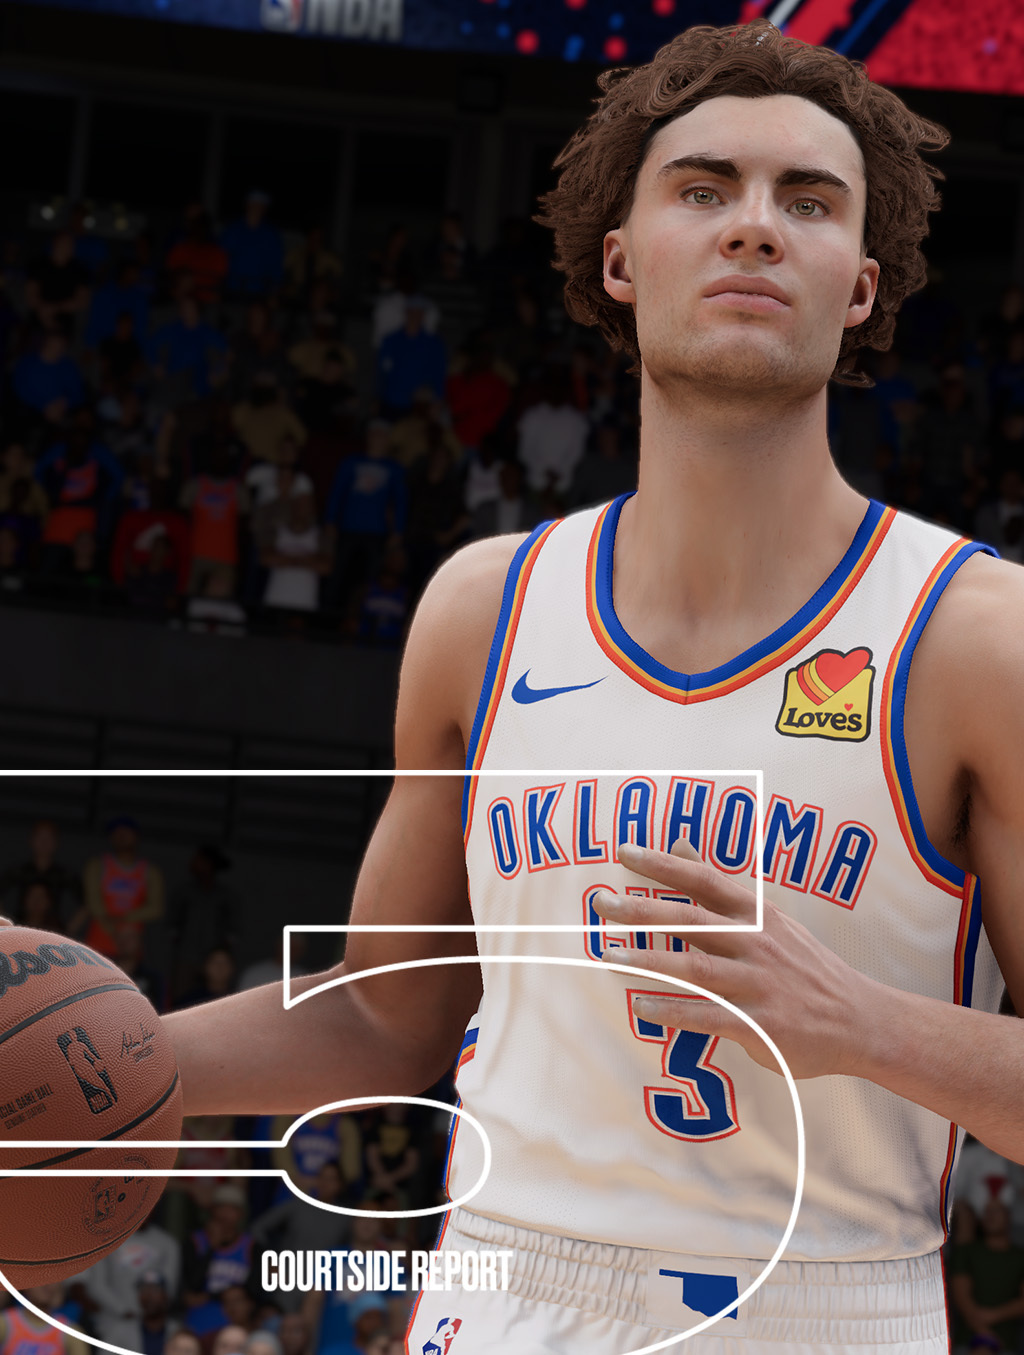 grinded the Jordan Challenge only to see the UNC jersey shows as a brown  shirt. : r/NBA2k